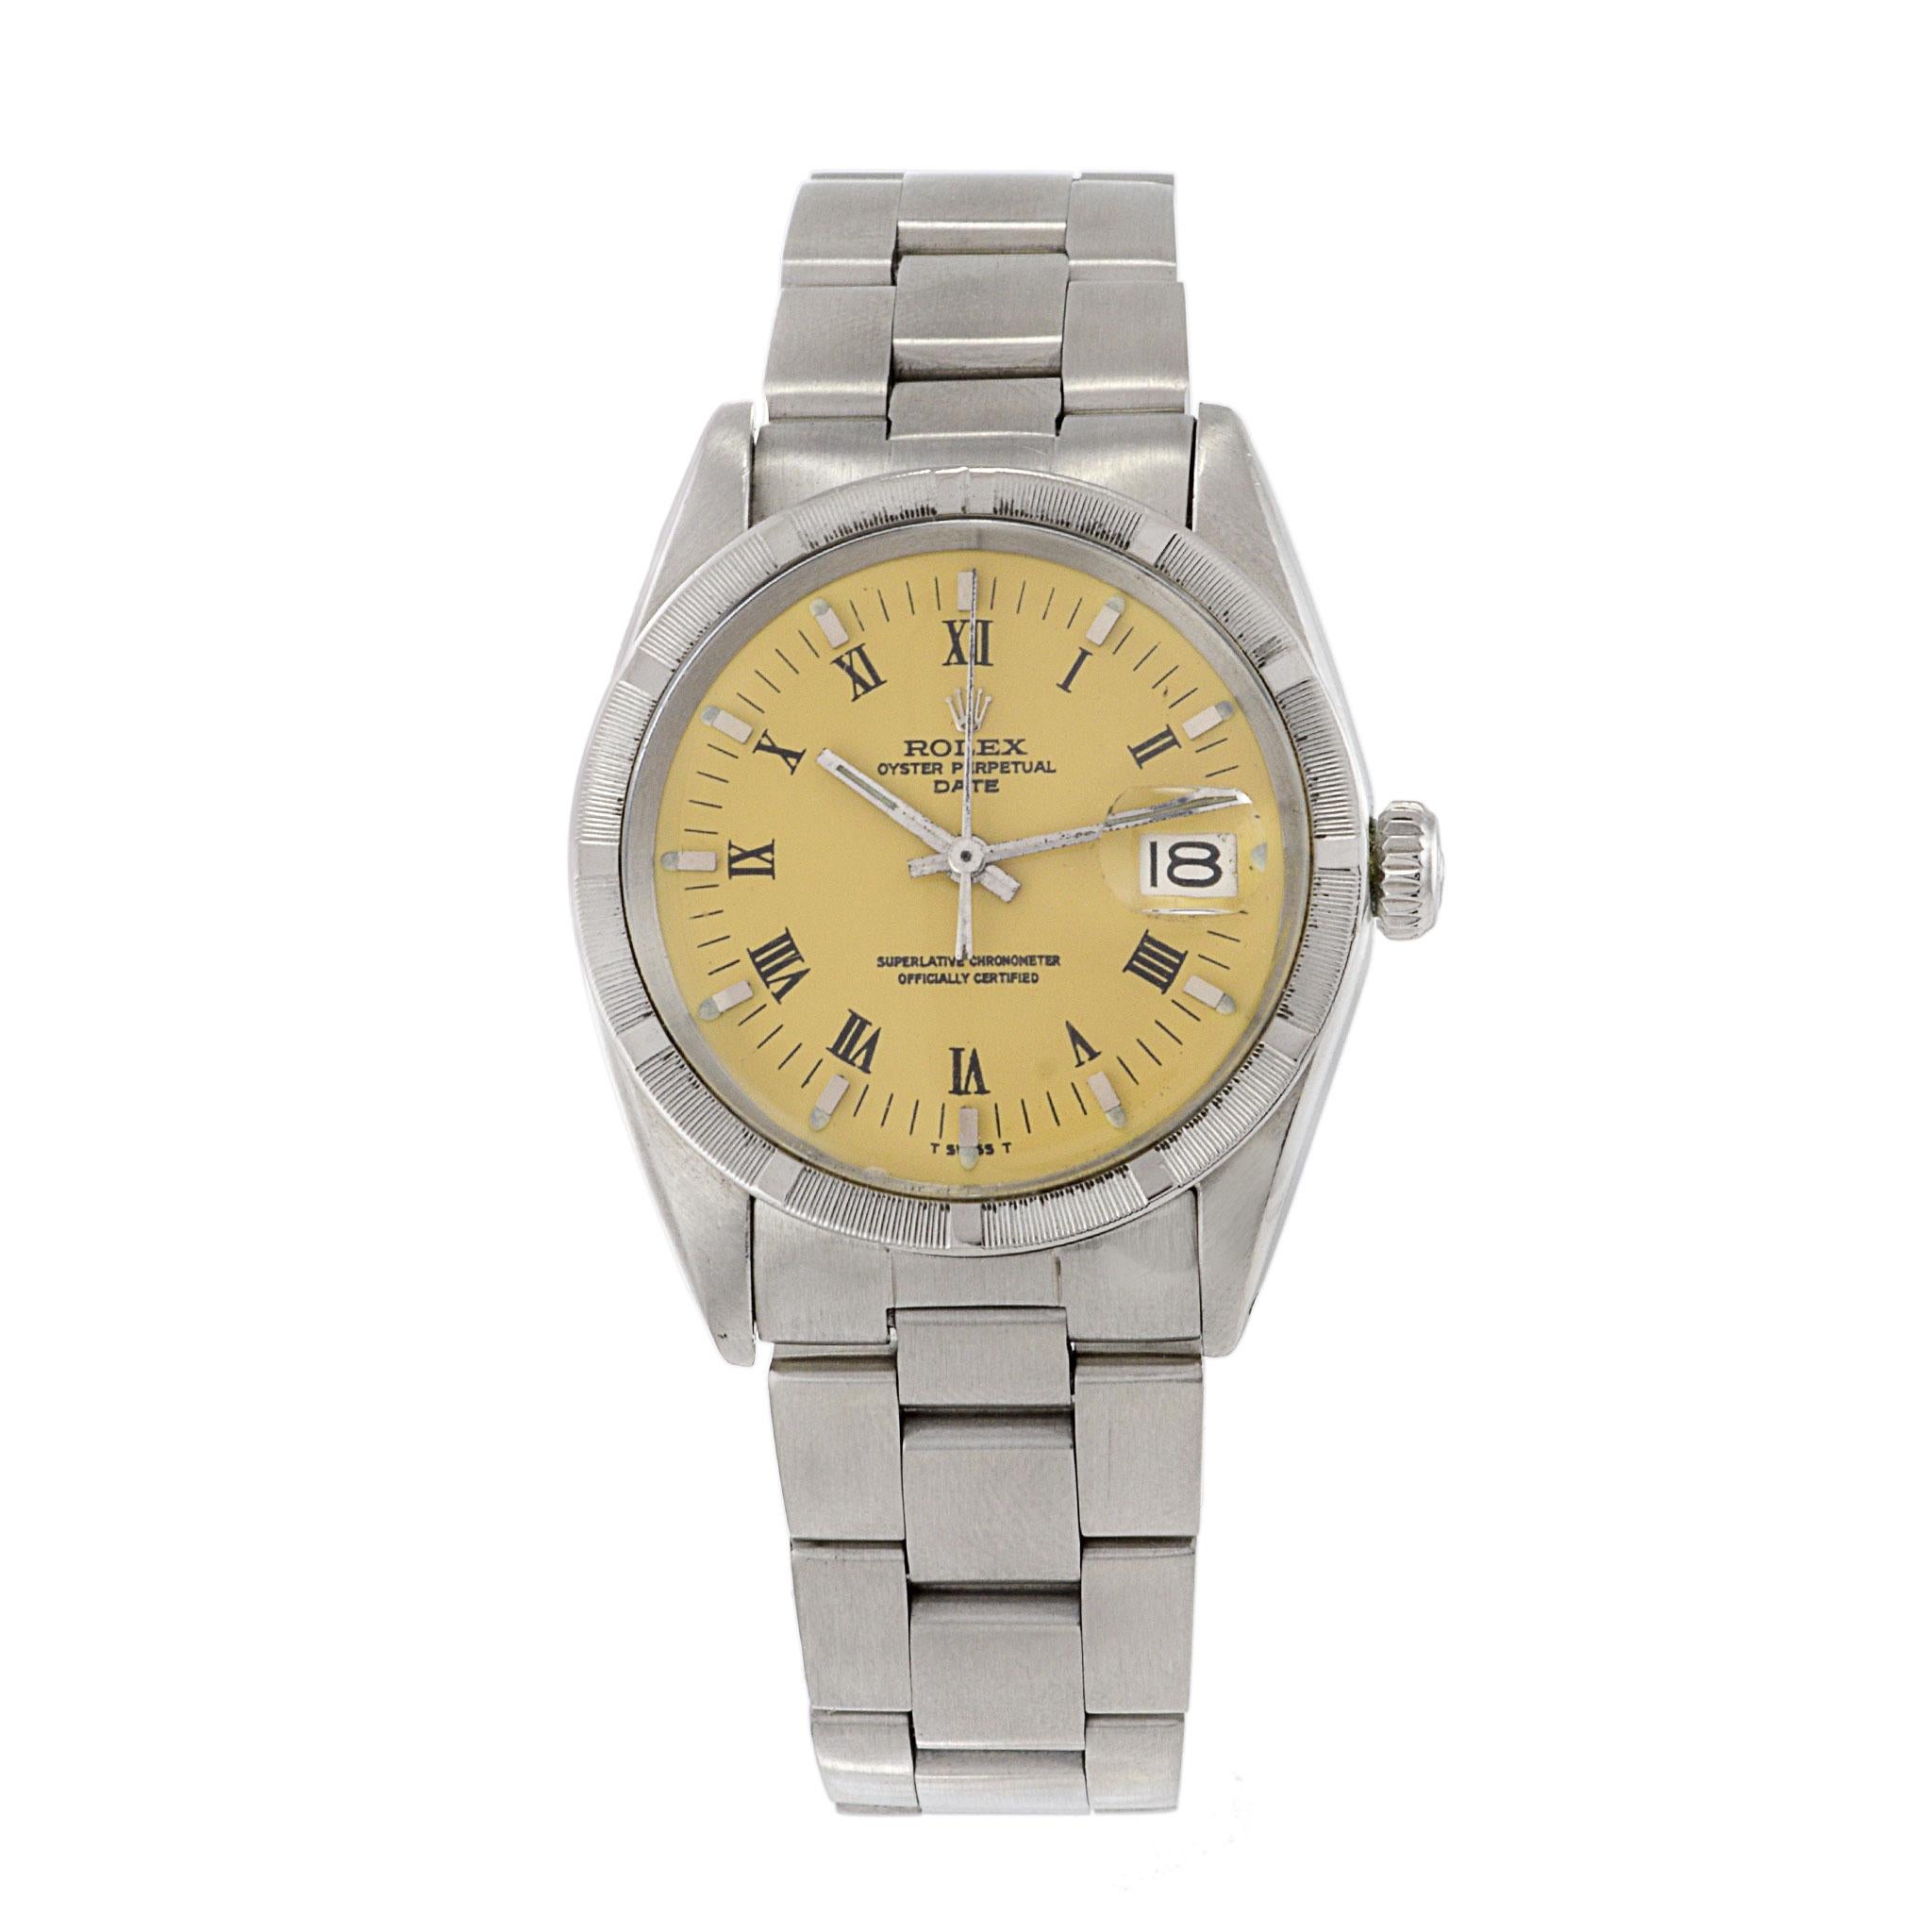 This vintage Rolex Date reference 1500 is from 1967 and remains a timeless classic suitable for both men and women. It features an automatic movement, ensuring reliable timekeeping. The 34mm stainless steel case with an engine turn bezel and acrylic